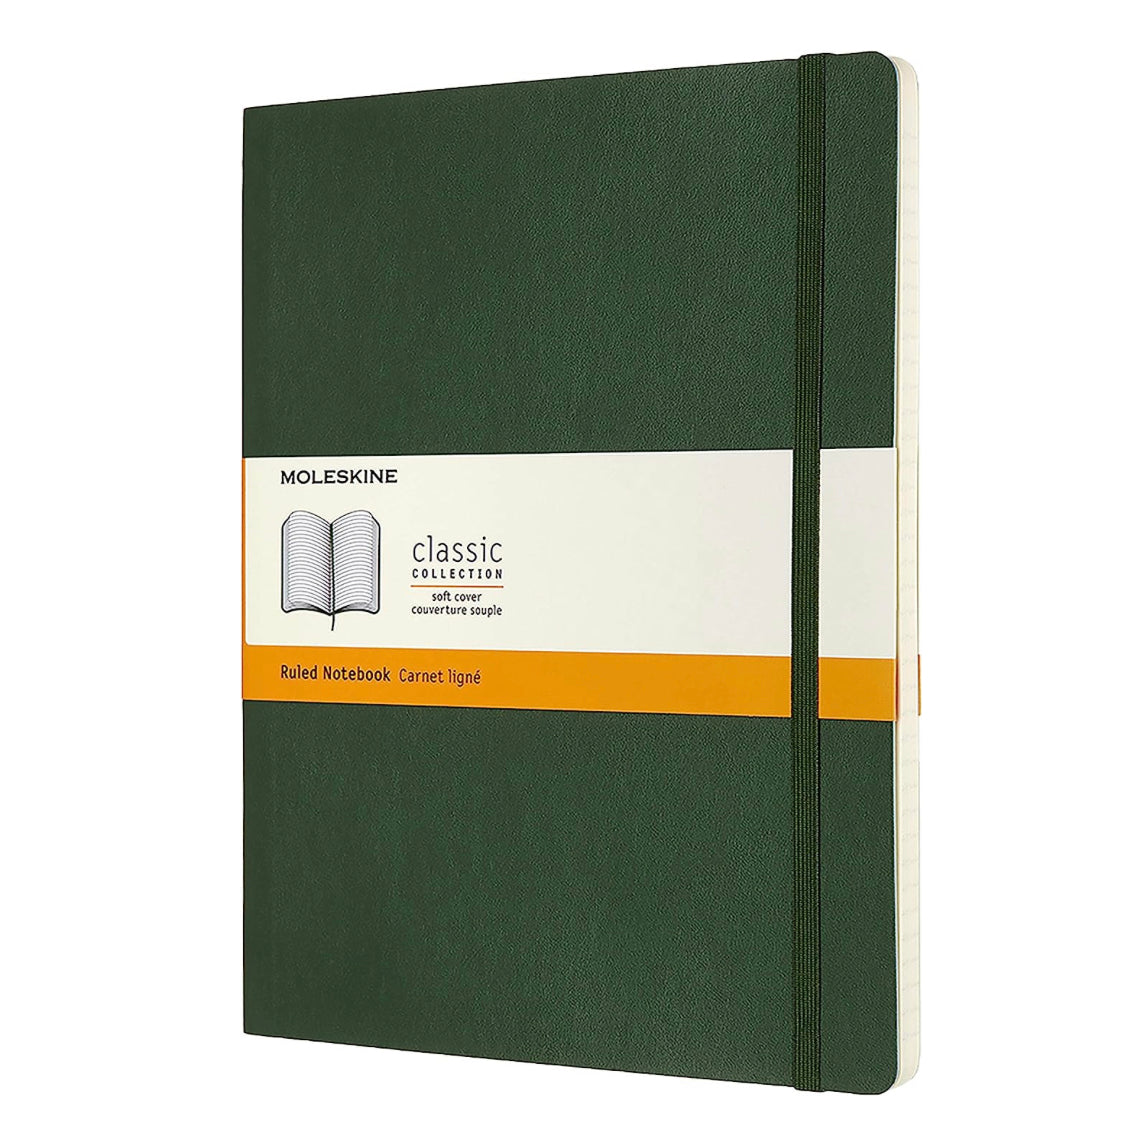 Moleskine Notebook Classic Extra Large Myrtle Green Soft Cover - Ruled